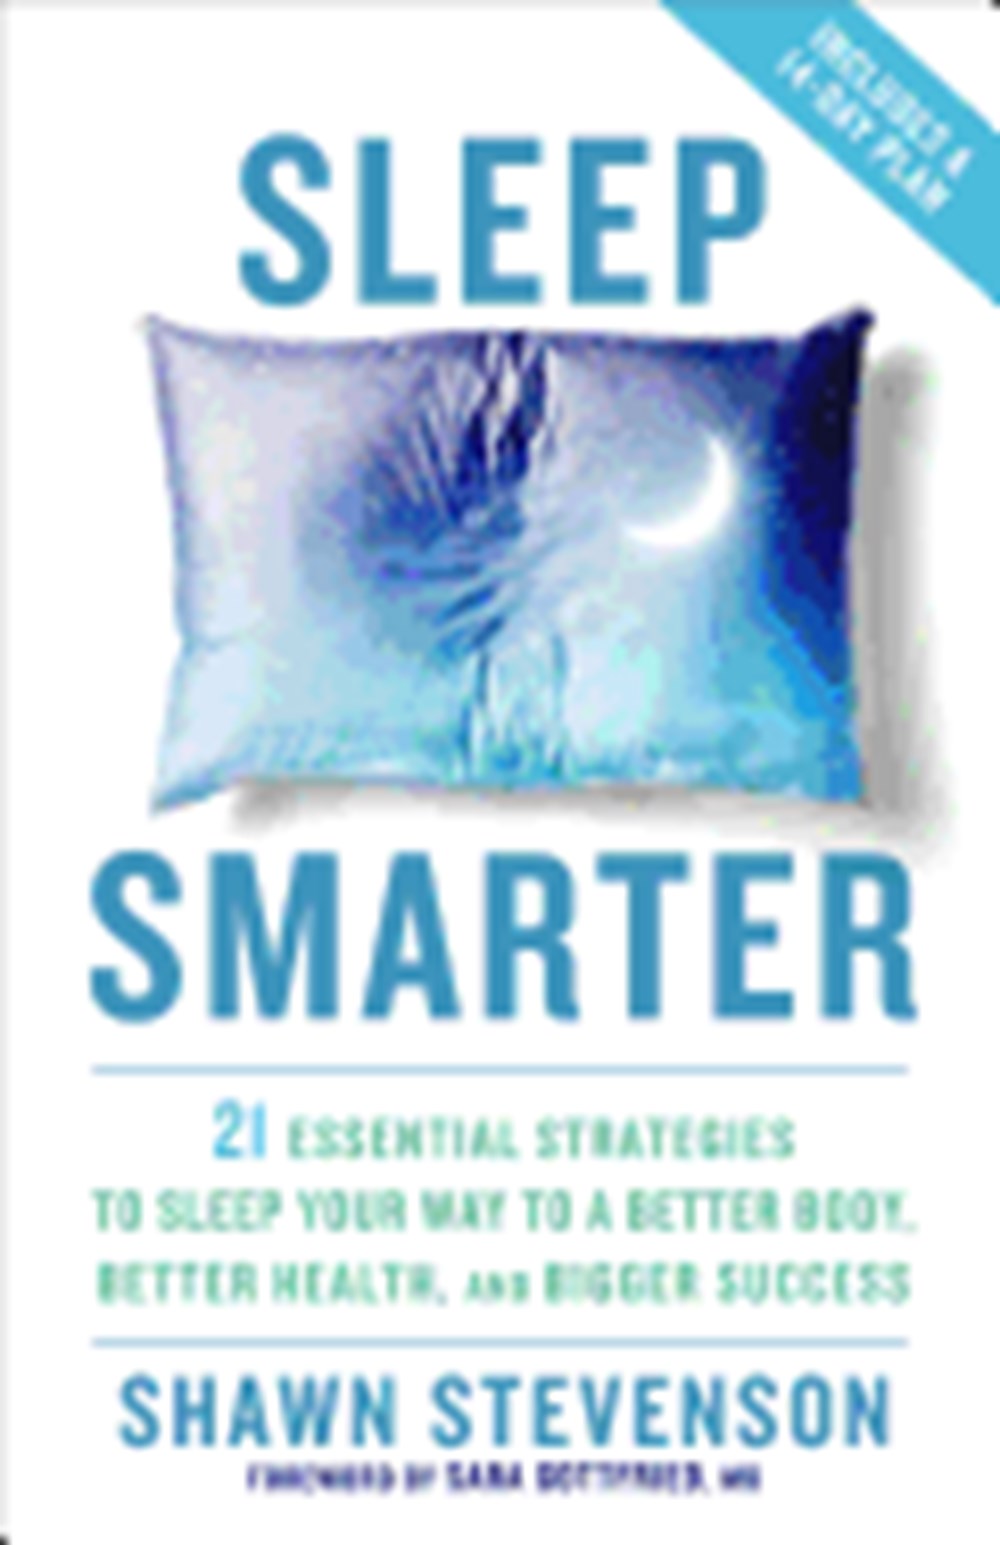 Sleep Smarter: 21 Essential Strategies to Sleep Your Way to a Better Body, Better Health, and Bigger